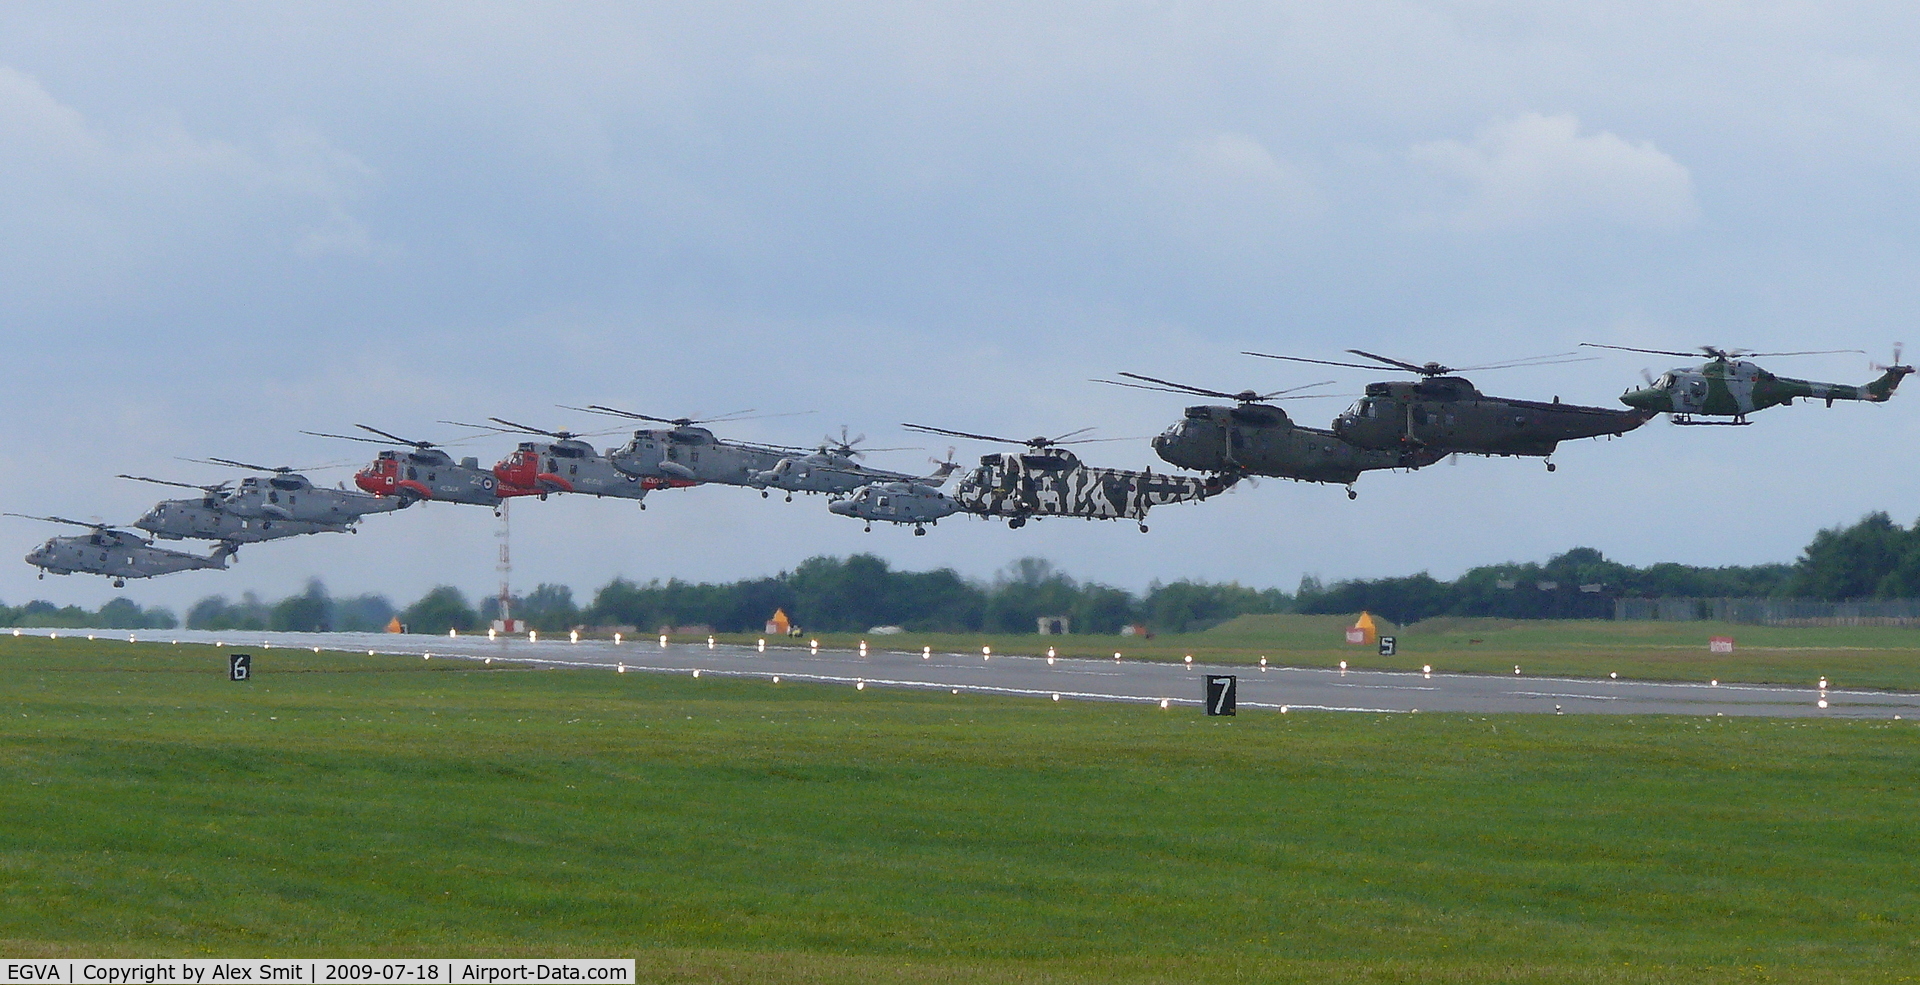 RAF Fairford Airport, Fairford, England United Kingdom (EGVA) - Flypast to commemmorate 100 years of Navy flying in the UK